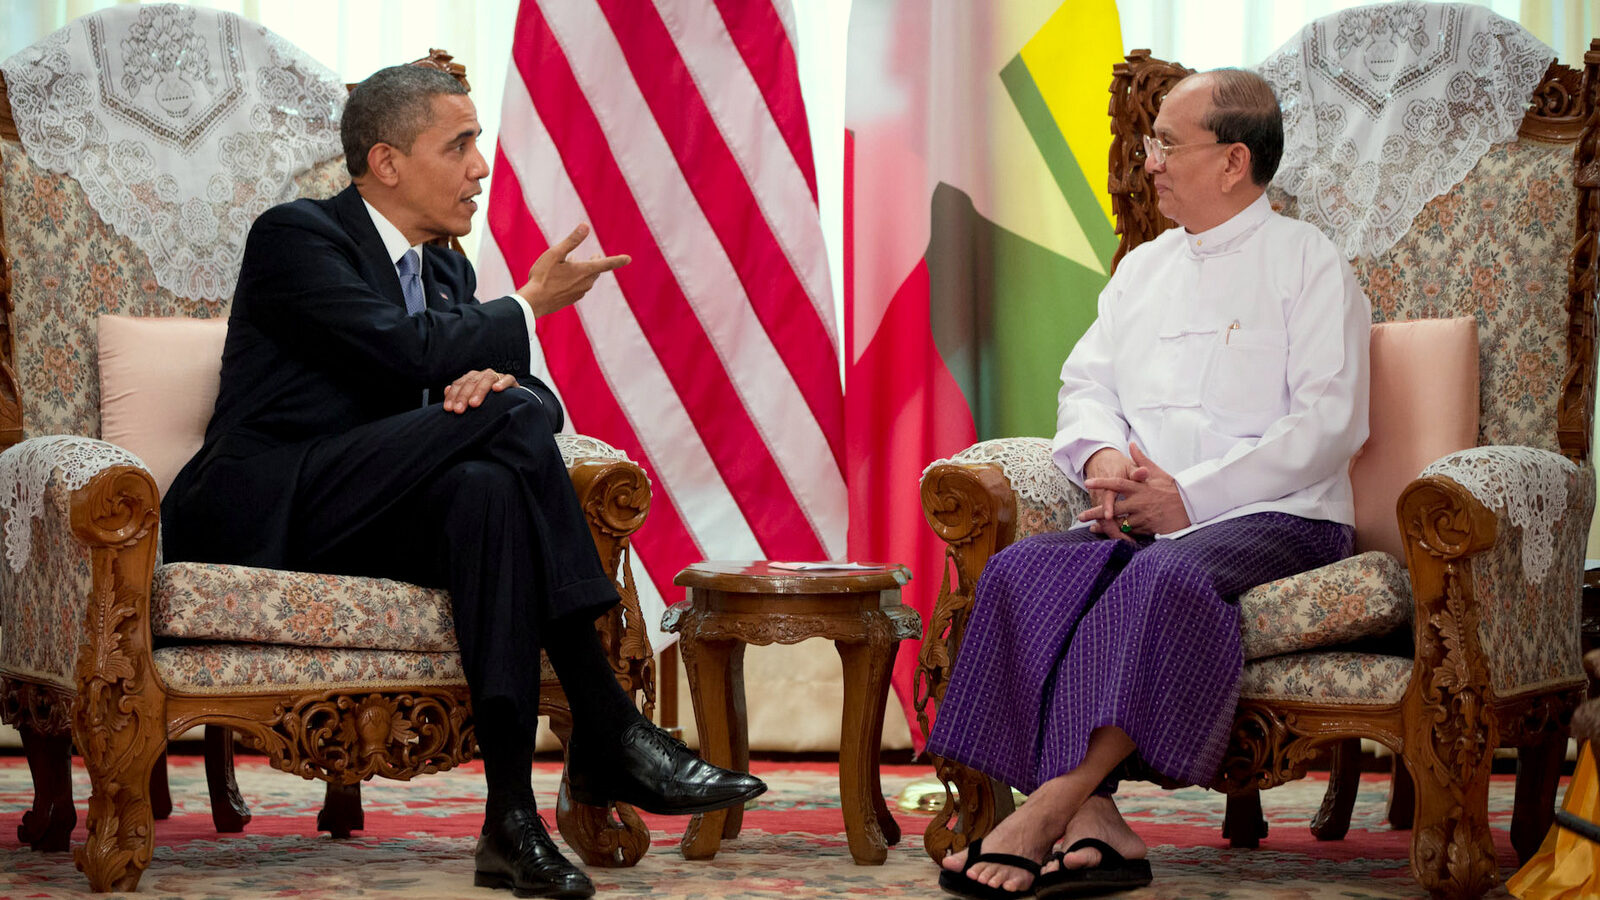 President Barack Obama holds a meeting with President Thein Sein of Burma at the Burma Parliament Building in Rangoon, Burma, Nov. 19, 2012. (Official White House Photo by Pete Souza)